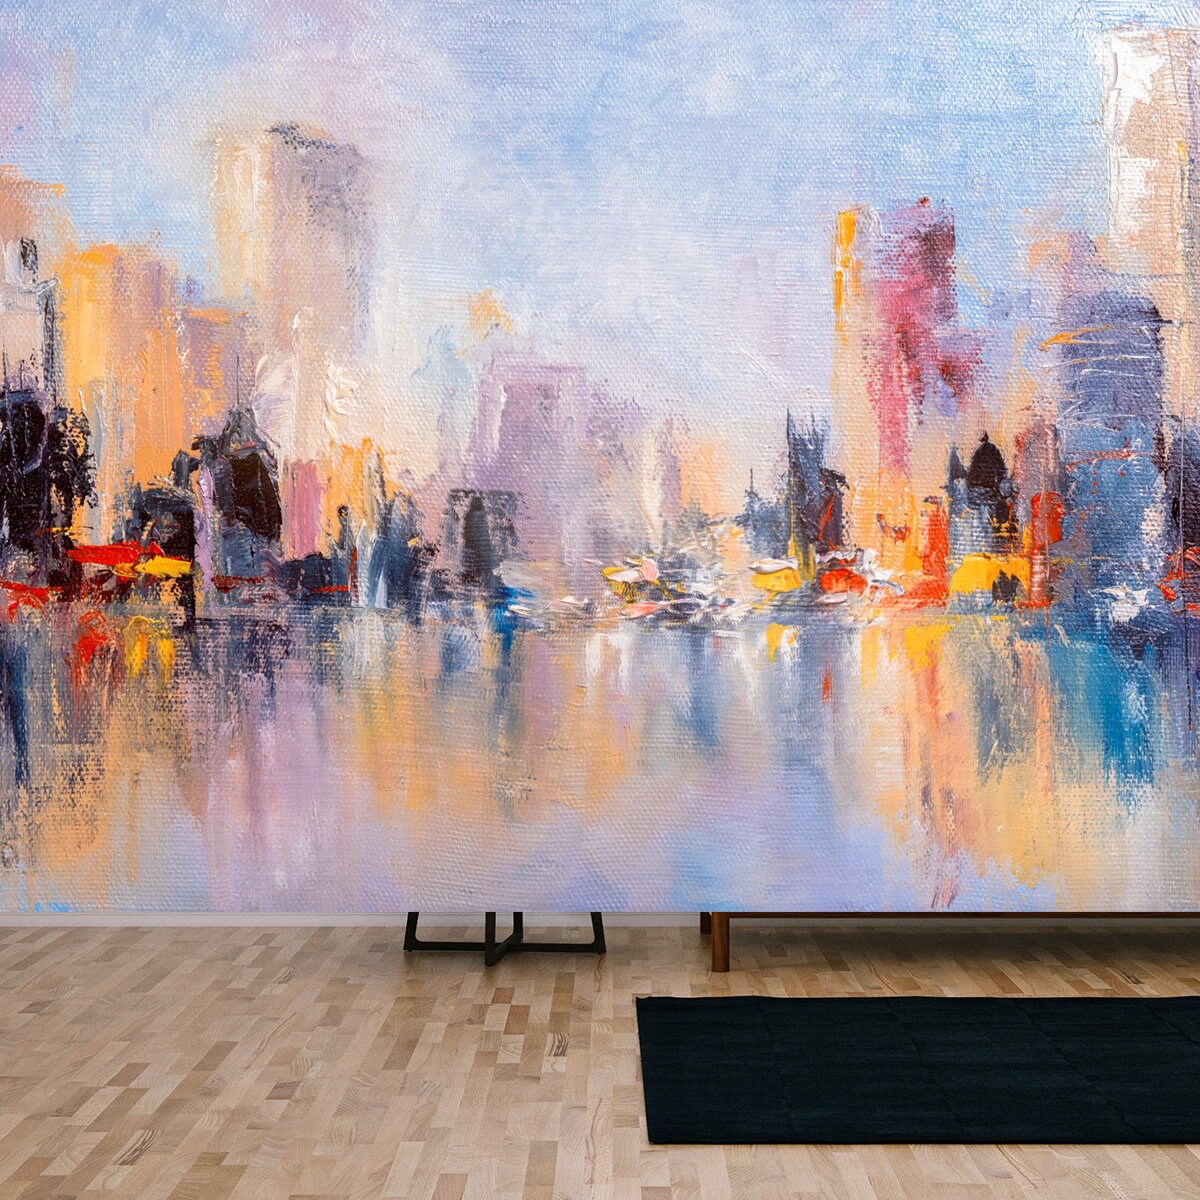 Skyline City View with Reflections on Water. Original Oil Painting on Canvas Wallpaper Living Room Mural